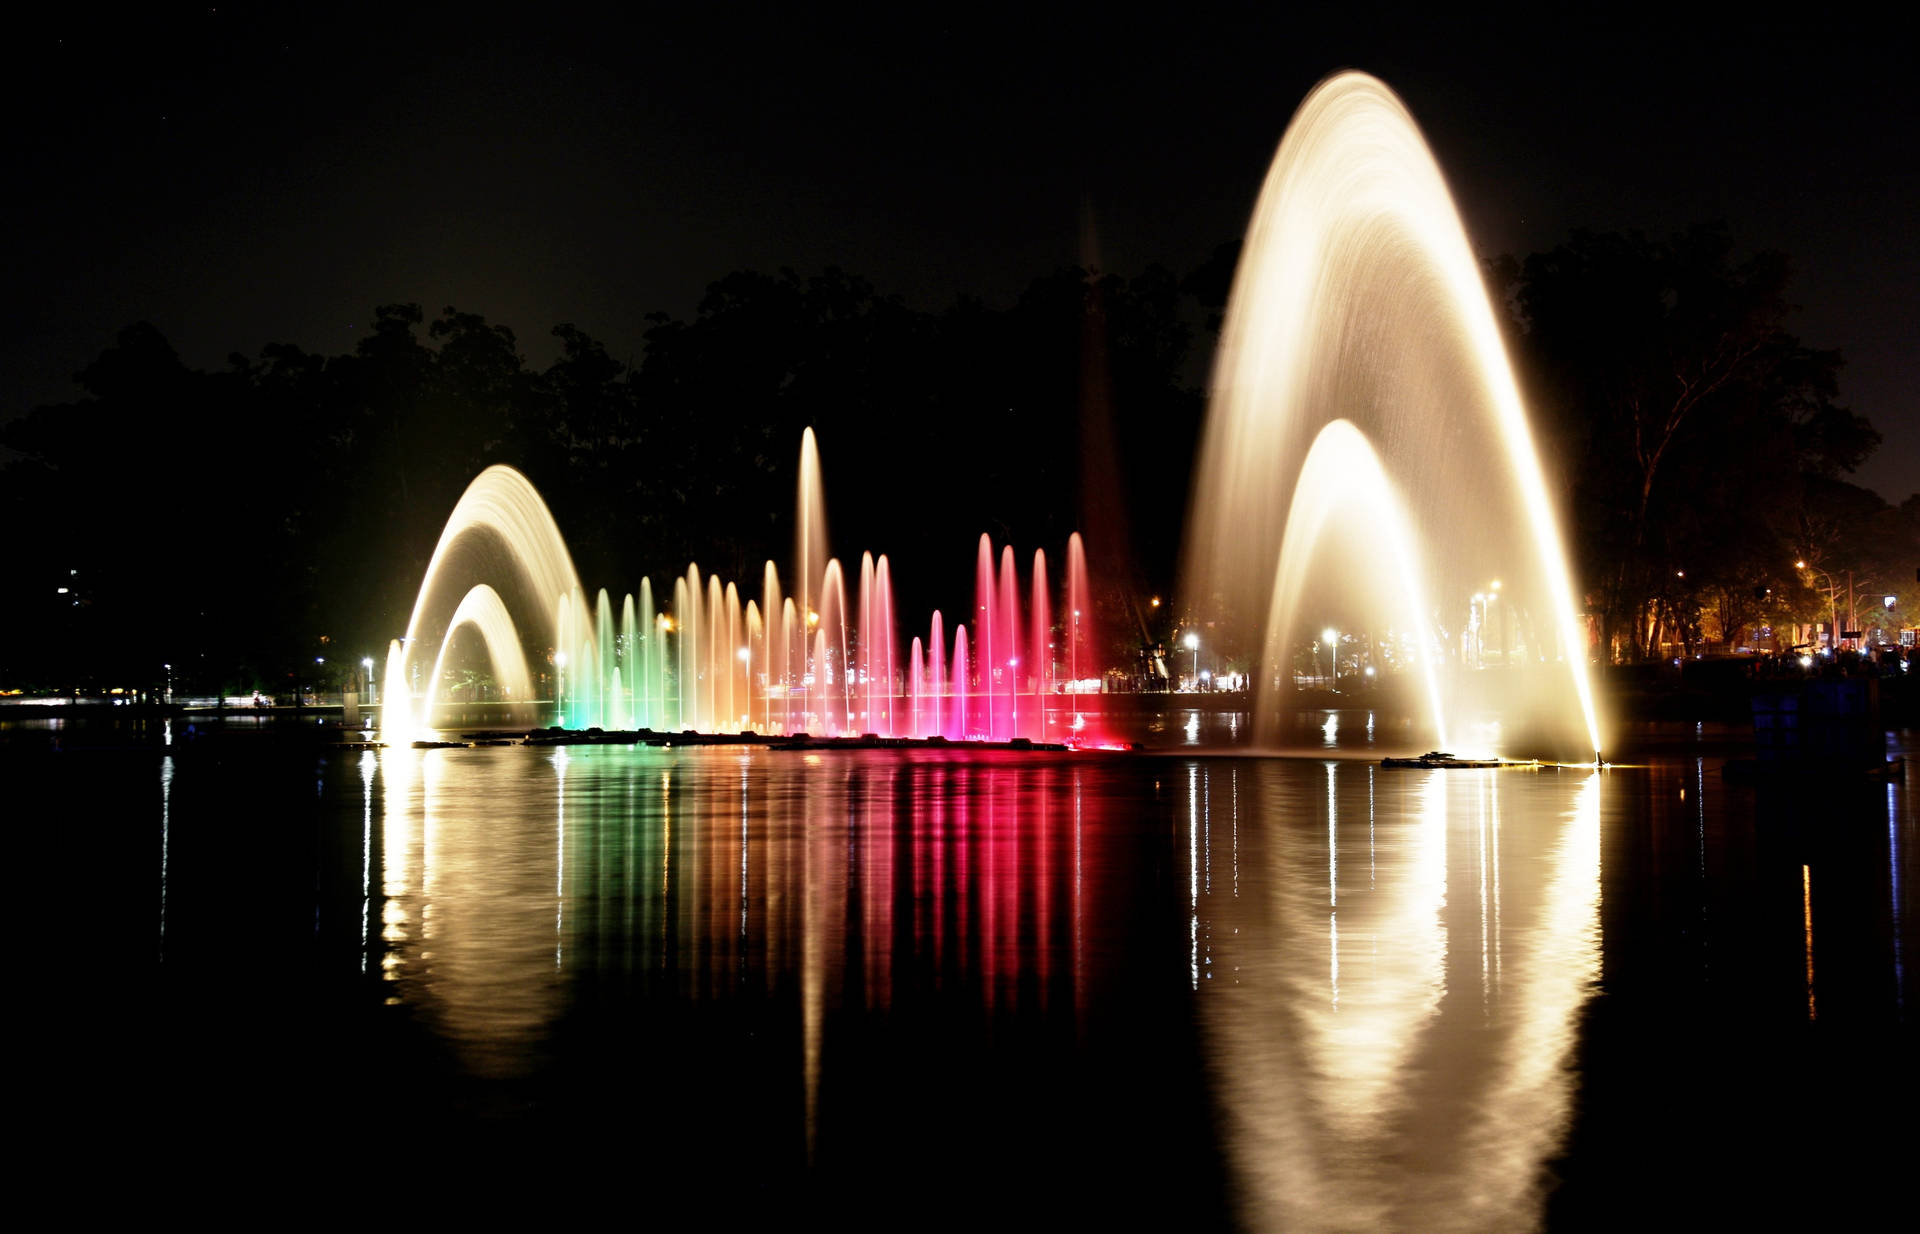 Spectacular view of the Ibirapuera Park in Brazil with beautiful fountains Wallpaper